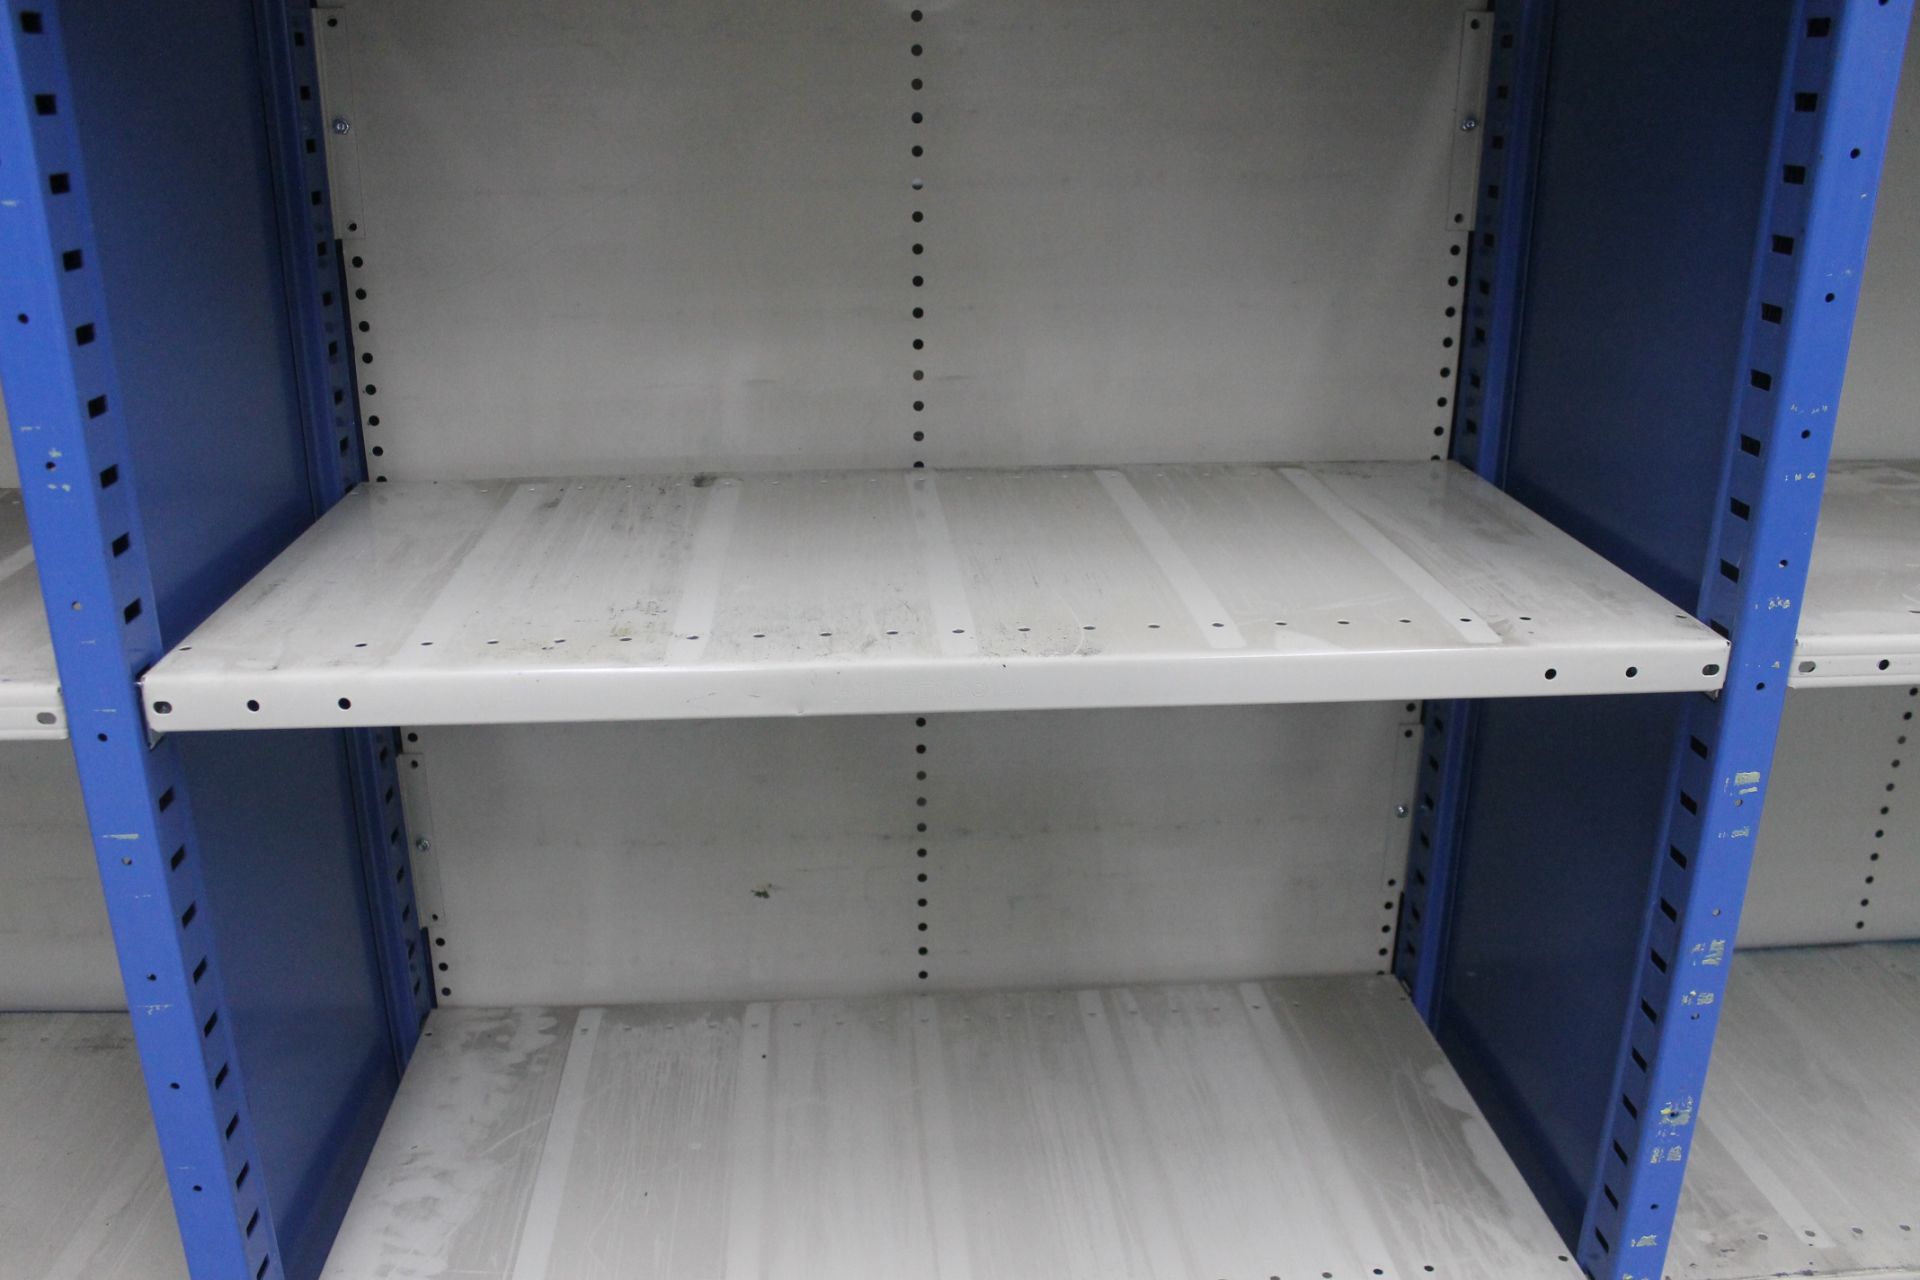 52 SECTIONS OF HALLOWELL H-POST CLOSED SHELVING (BACK TO BACK), SIZE: 98"H X 18"D X 36"W - Image 2 of 4